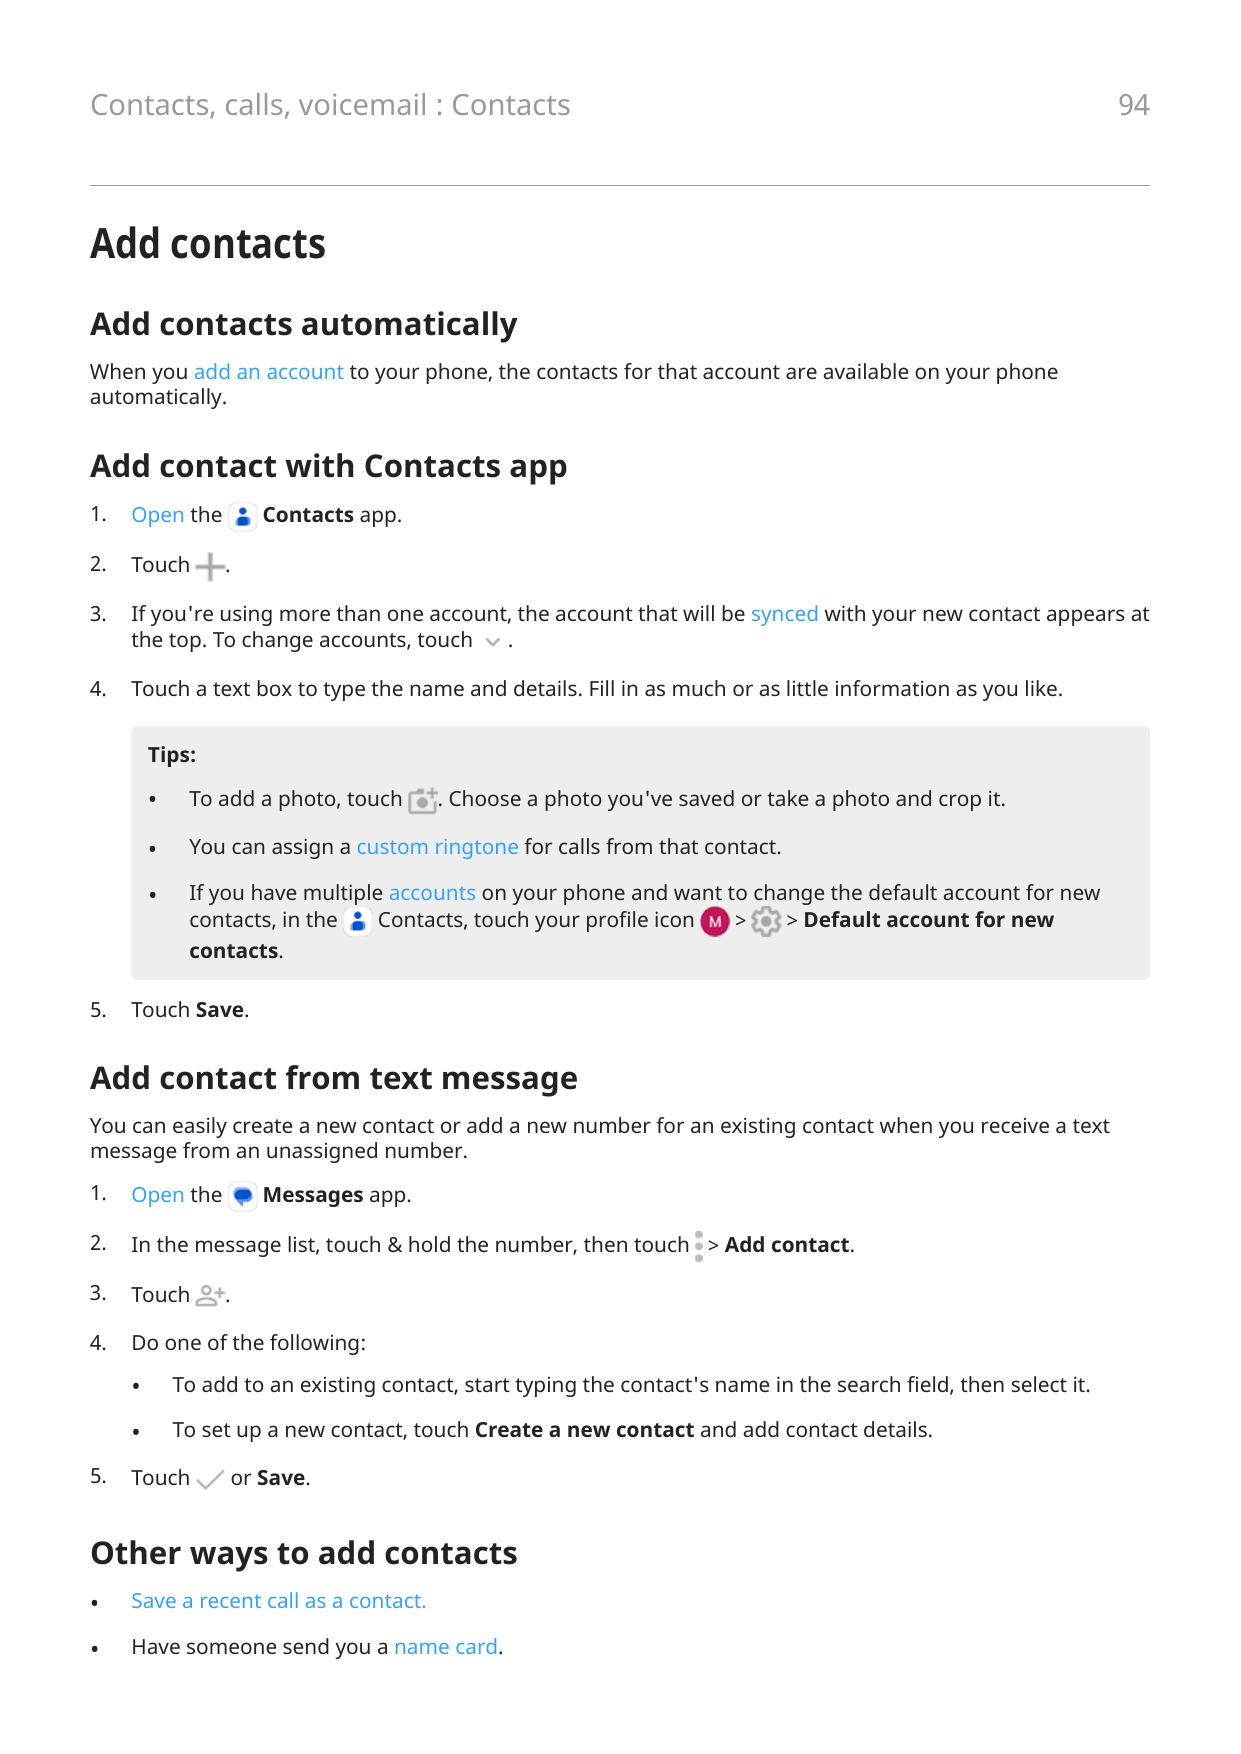 Contacts, calls, voicemail : Contacts94Add contactsAdd contacts automaticallyWhen you add an account to your phone, the contacts